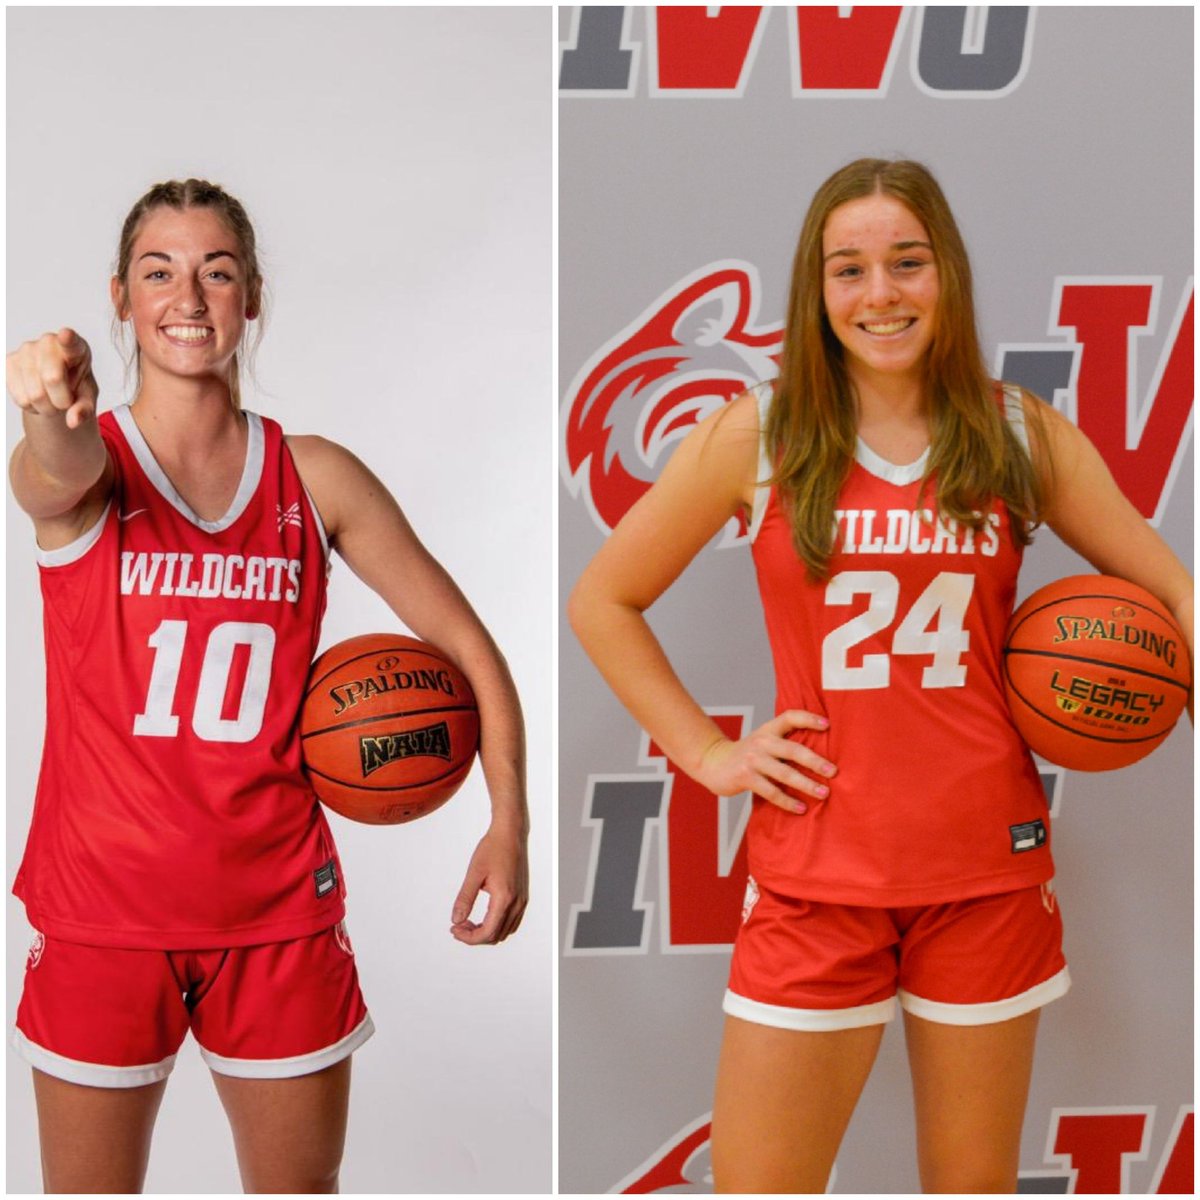 Excited to say I recieved an offer to continue my 🏀 & track and field career at @IWUWildcats alongside my big sis @HoveyJayd!! Thank you @IWU_WBB Coach Whaley, Sloan and Secrest! Thank you T/F Coach Snyder!